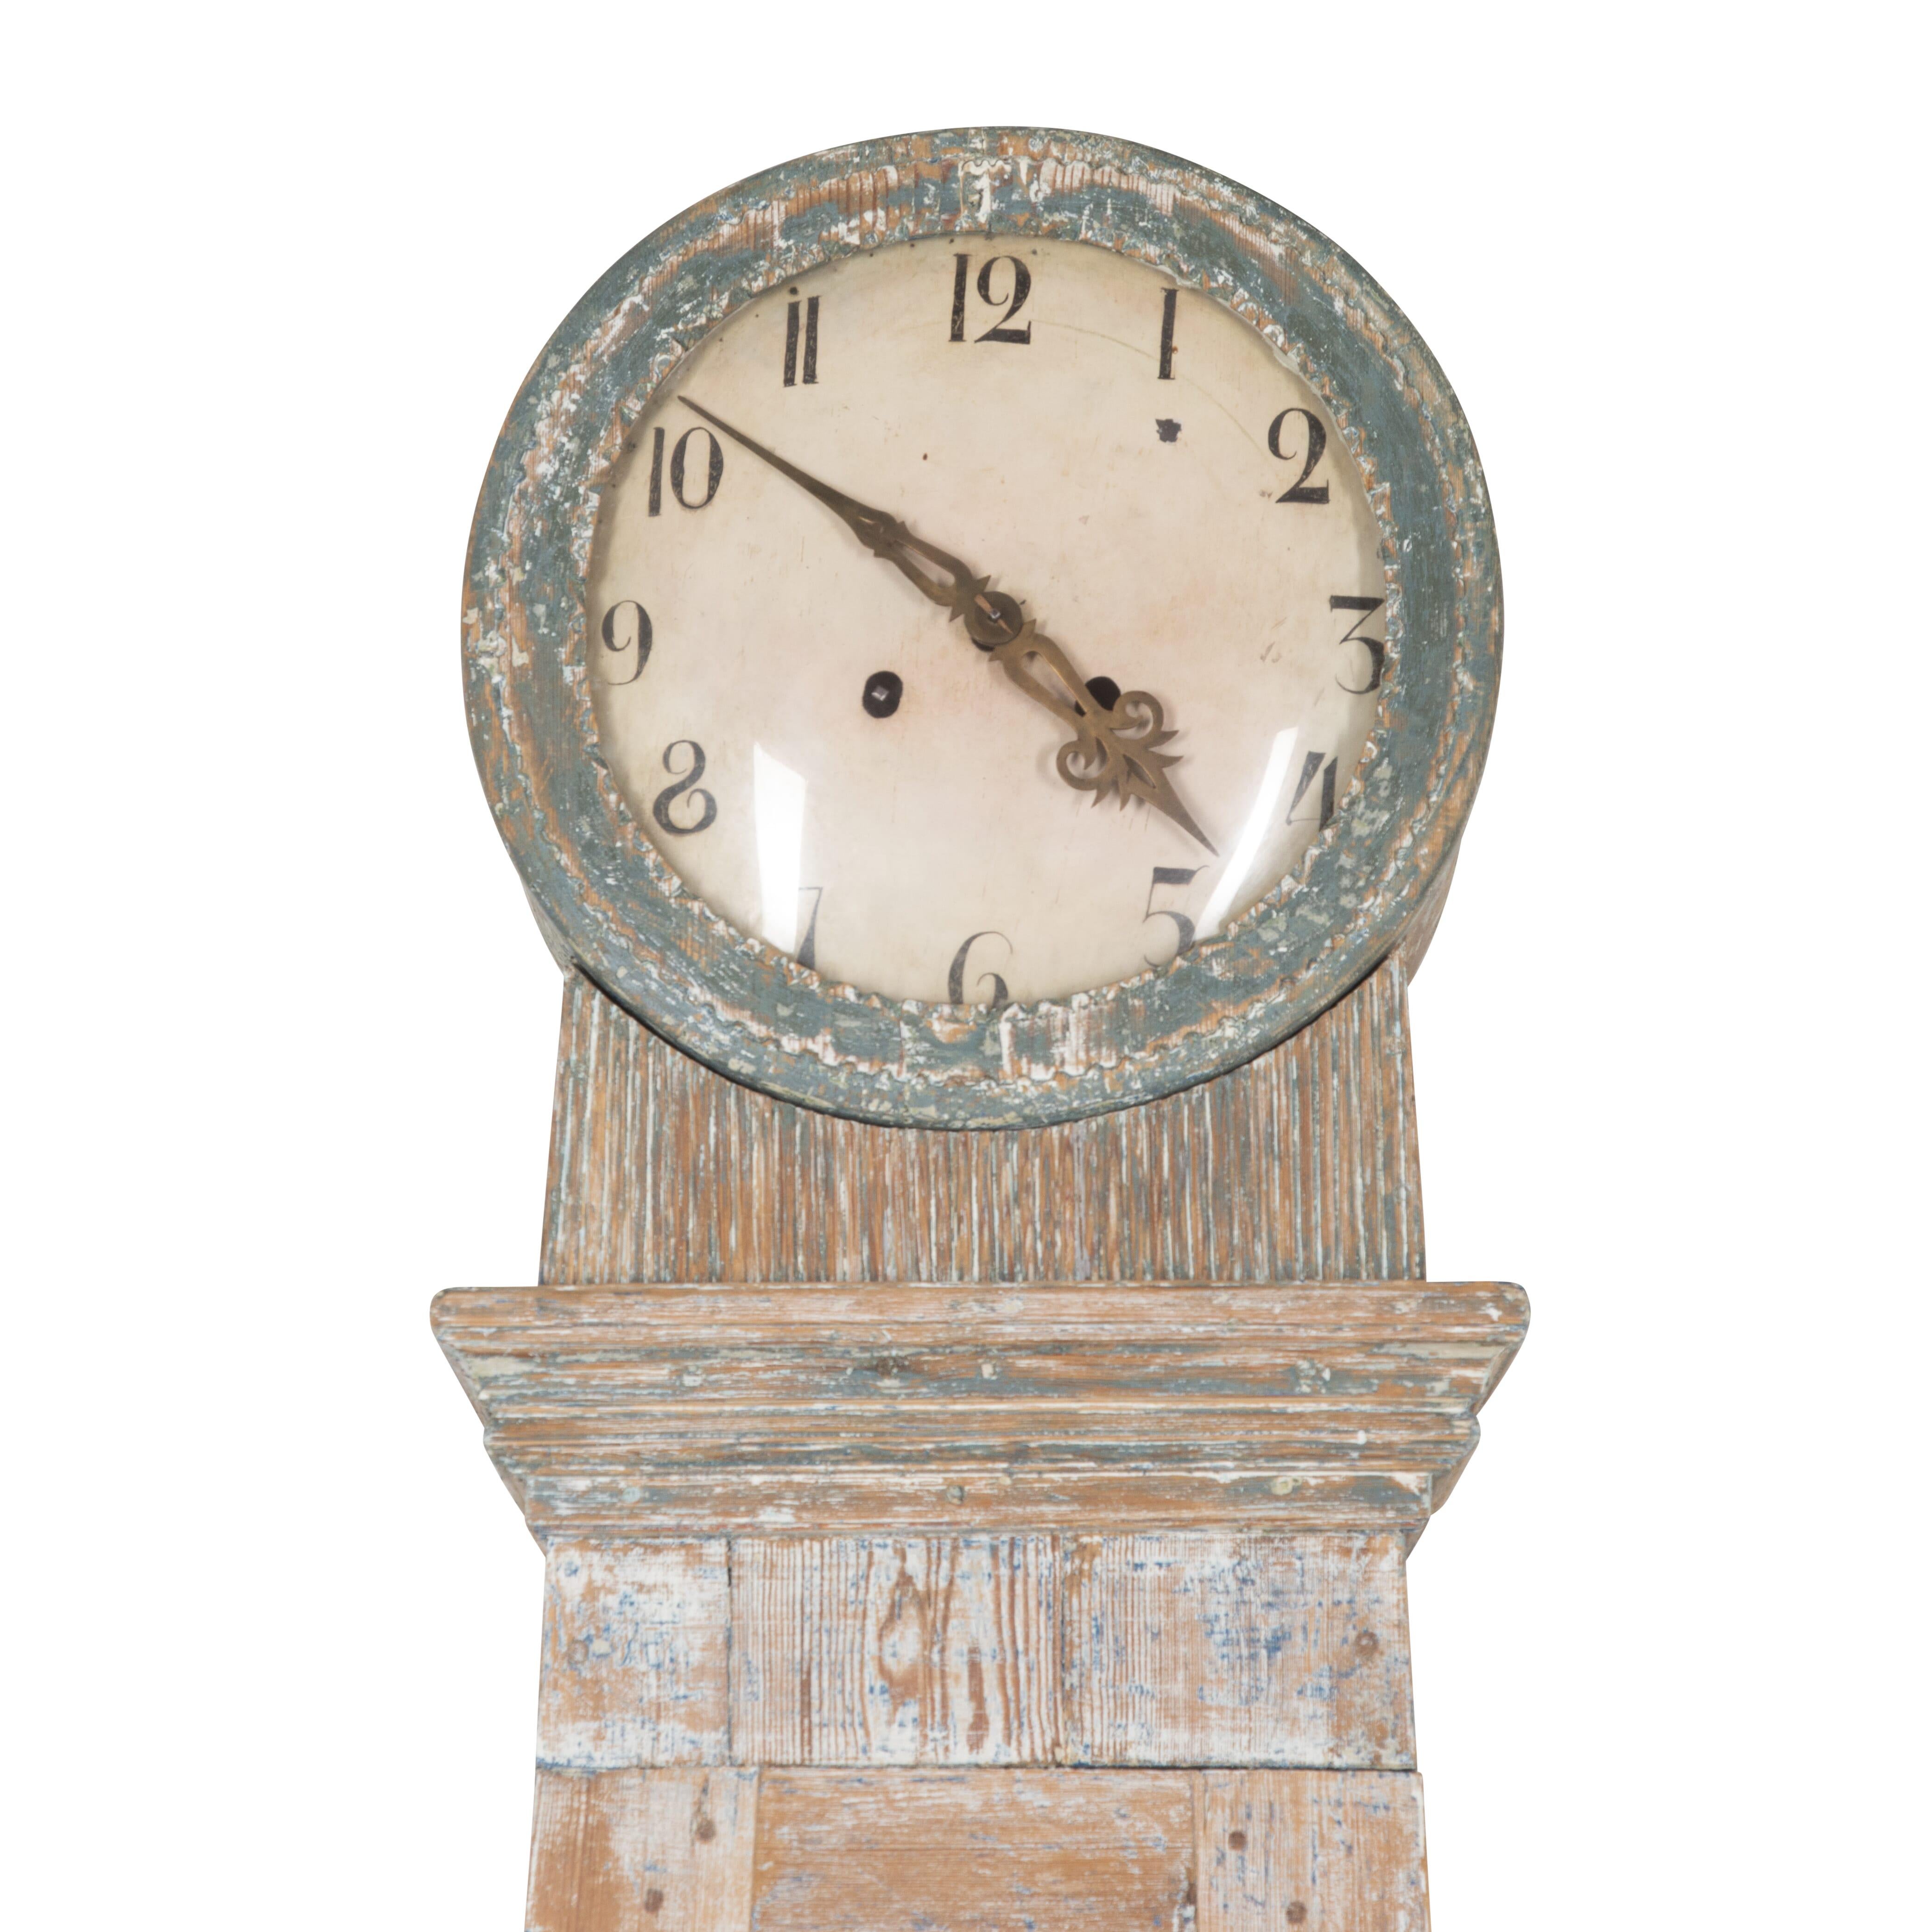 Period Swedish clock from the far north of Sweden, Norrbotten.
With its decorative original face and lovely reeded design to the front body of the clock. 
circa 1820.